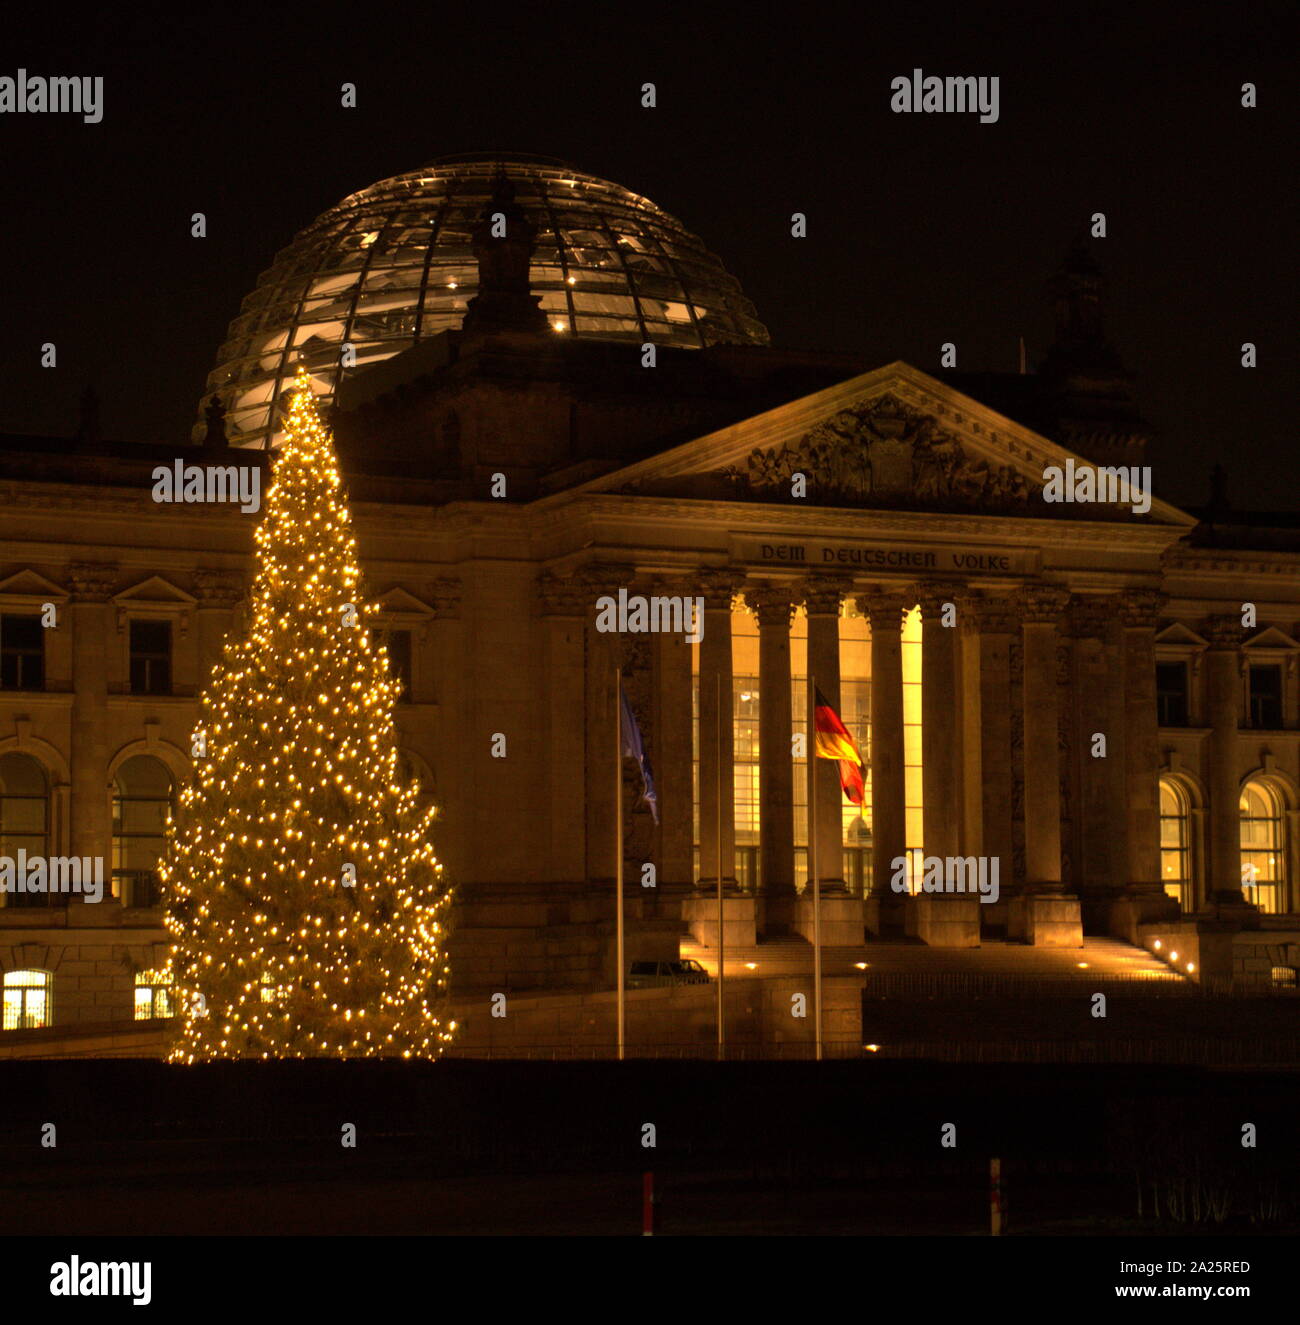 The Reichstag (Deutscher Bundestag), in Berlin, Germany at Christmass. Constructed to house the Imperial Diet (German: Reichstag) of the German Empire. It was opened in 1894 and housed the Diet until 1933, when it was severely damaged after being set on fire. After World War II, the building fell into disuse. After German reunification on 3 October 1990, when it underwent a reconstruction led by architect Norman Foster. After its completion in 1999, it once again became the meeting place of the German parliament: the modern Bundestag. Stock Photo